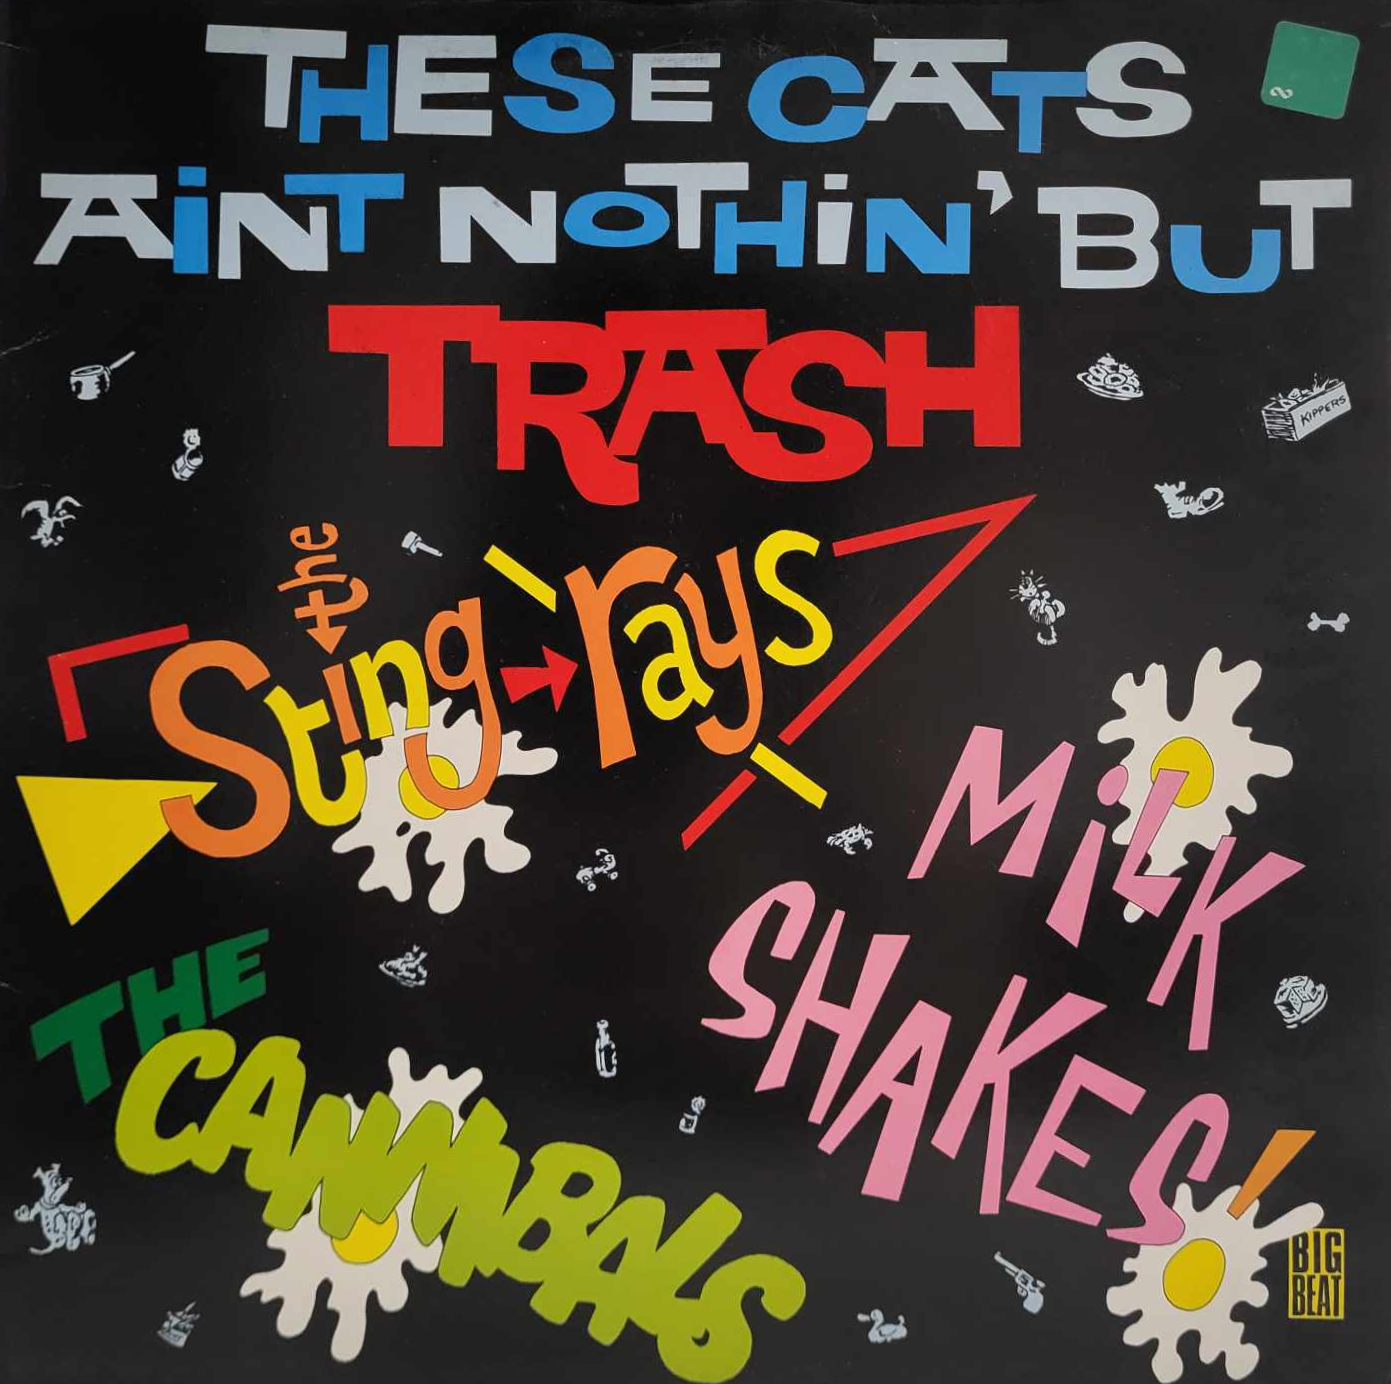 VARIOUS - THESE CATS AIN'T NOTHING BUT TRASH